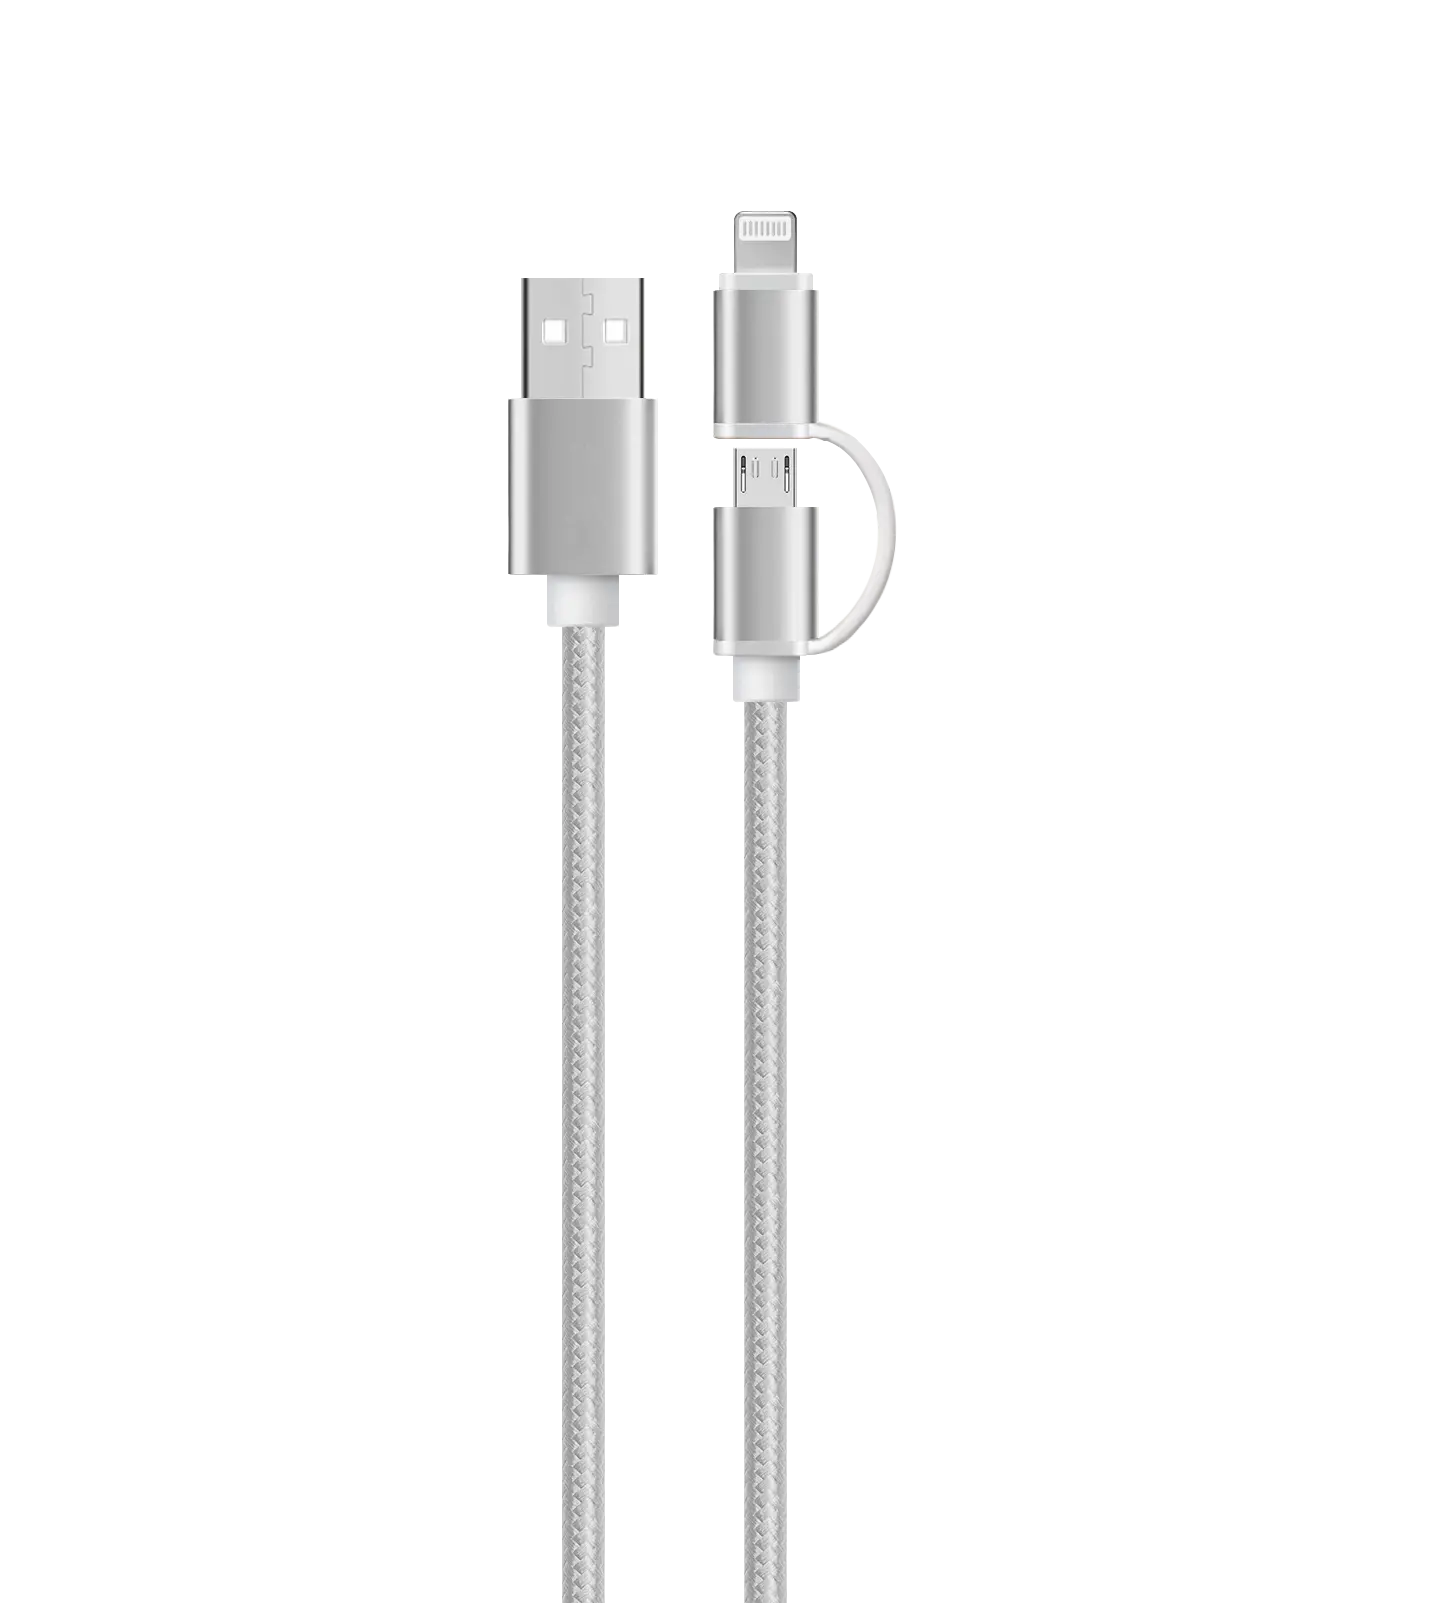 2 in 1 USB cable silver